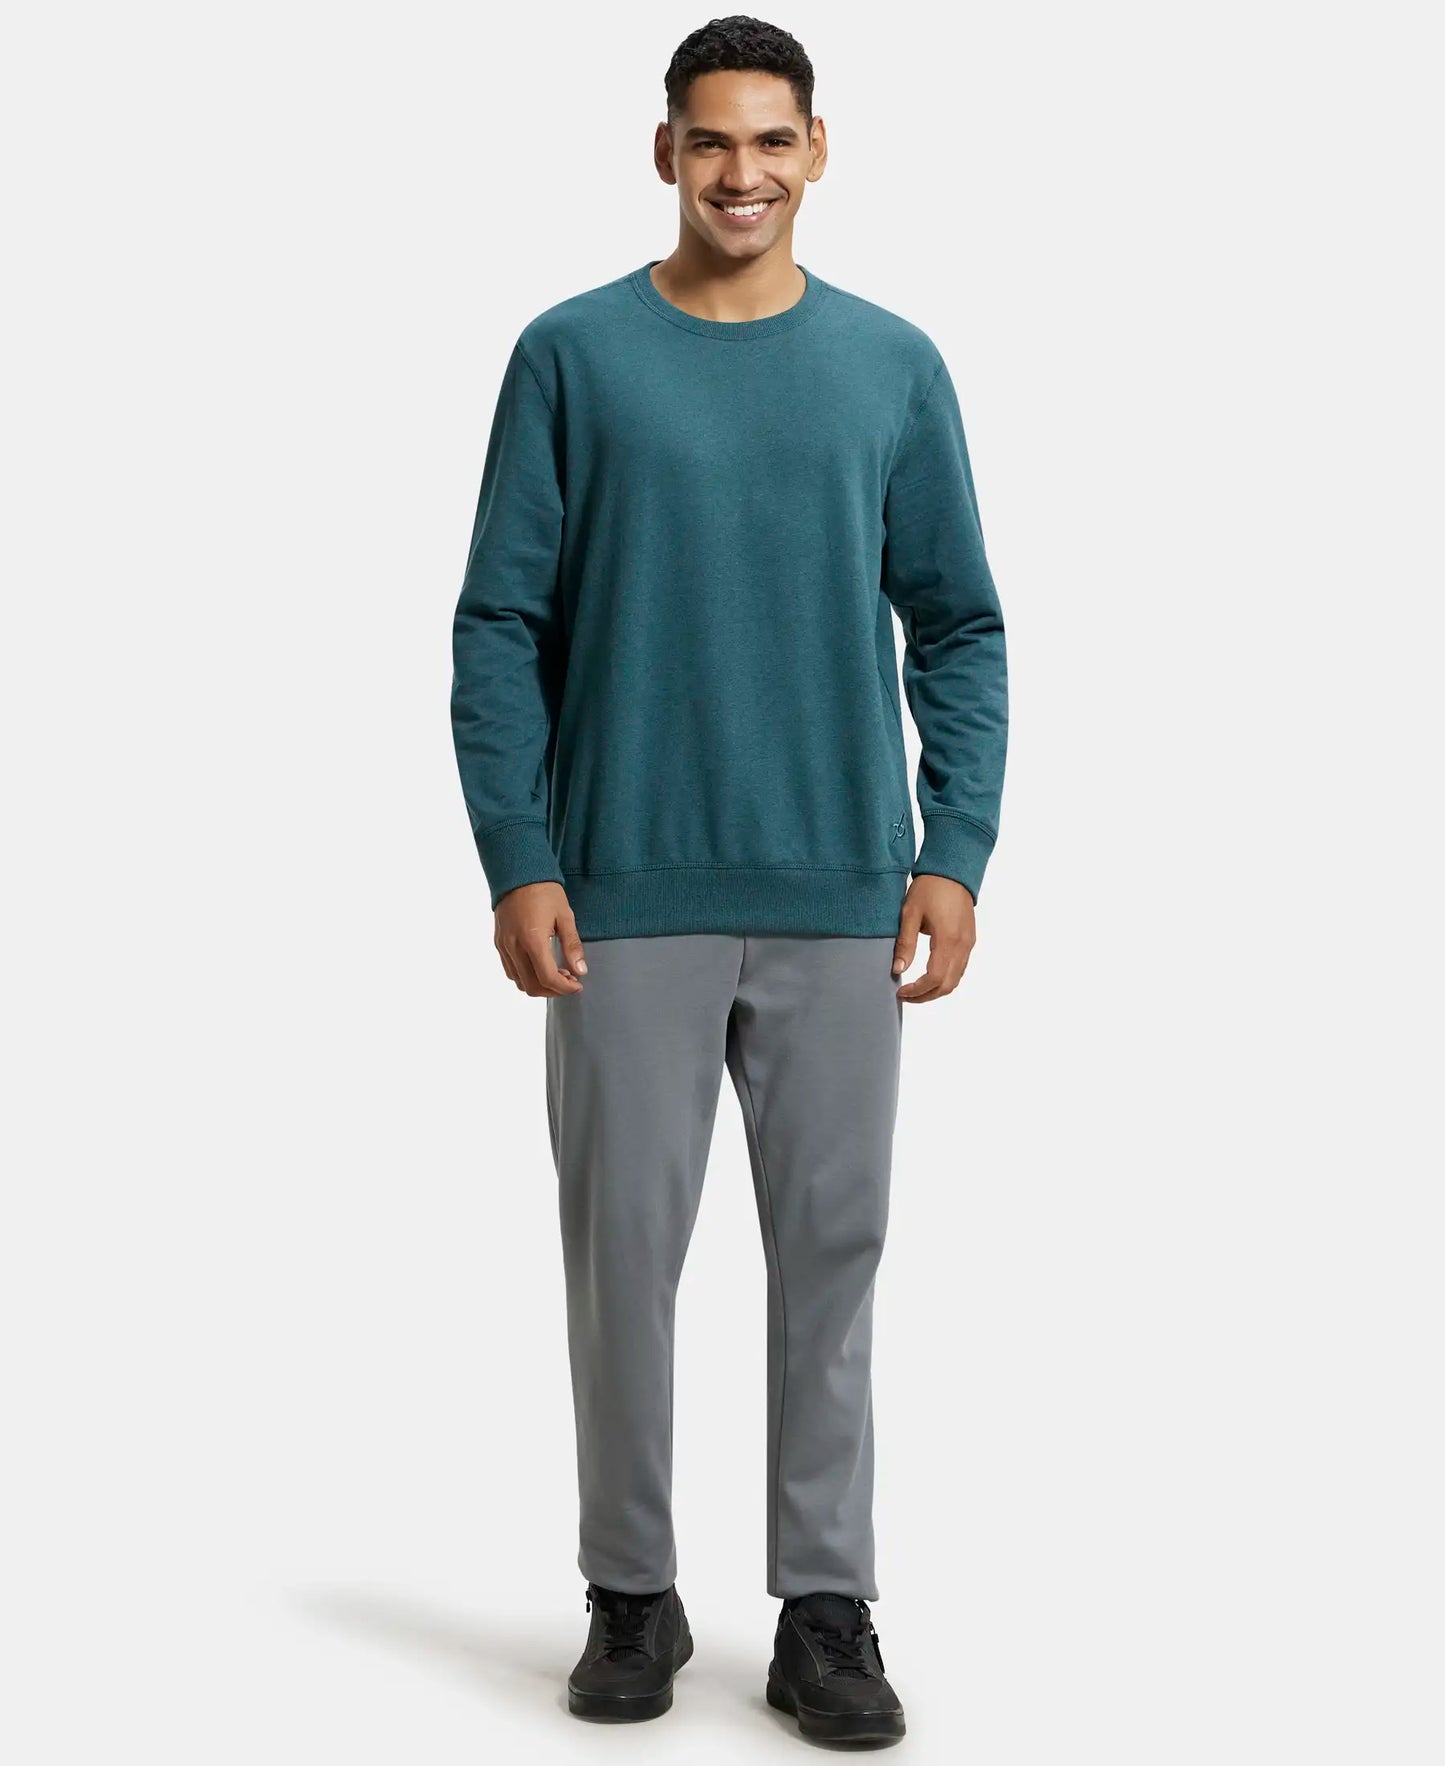 Super Combed Cotton French Terry Solid Sweatshirt with Ribbed Cuffs - Pine Melange-4